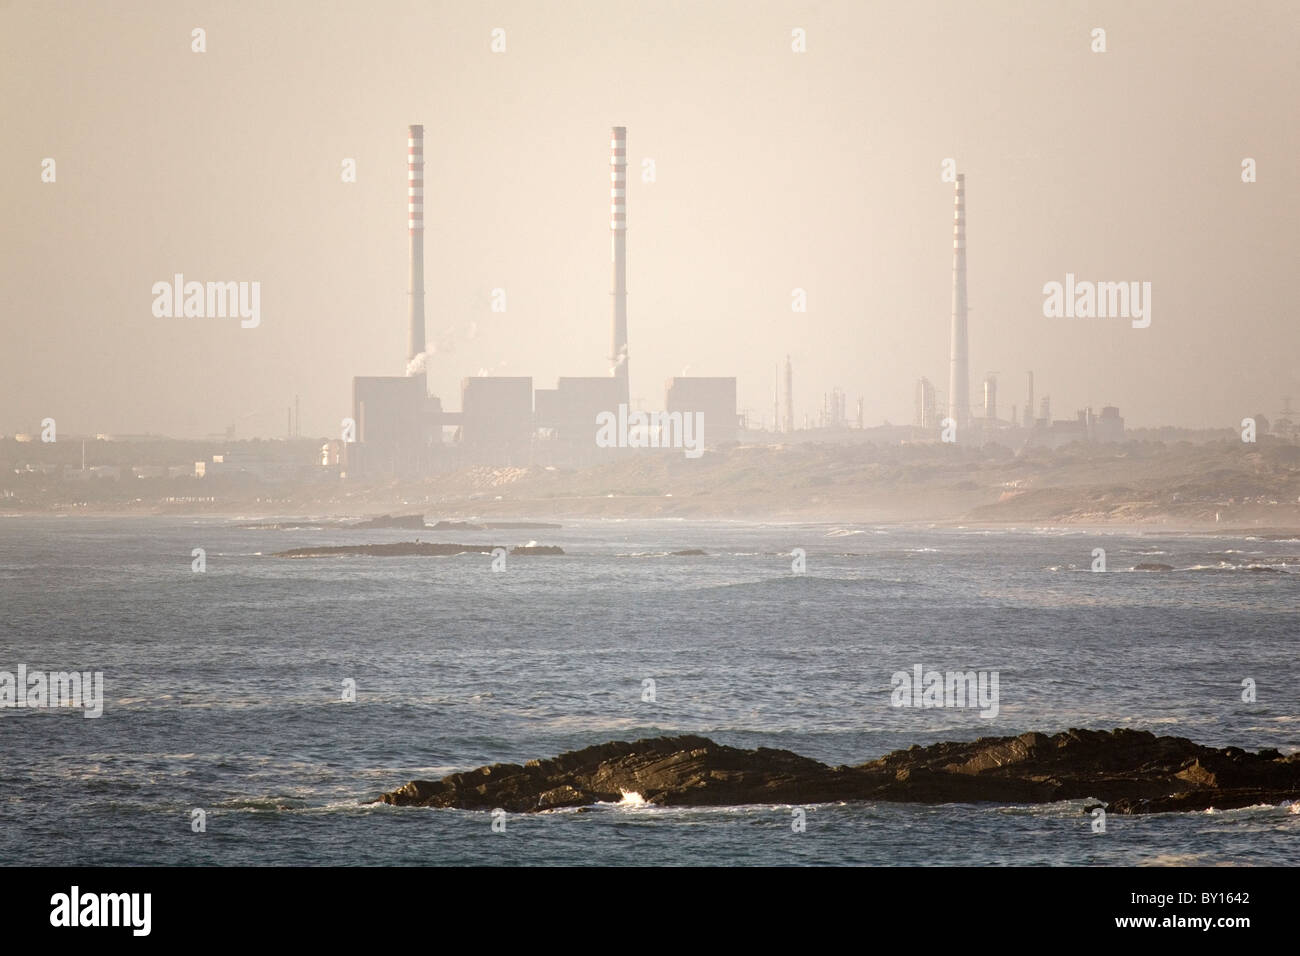 The chimneys of industrial plants at Sines on Portugal's Alentejo coast. Stock Photo